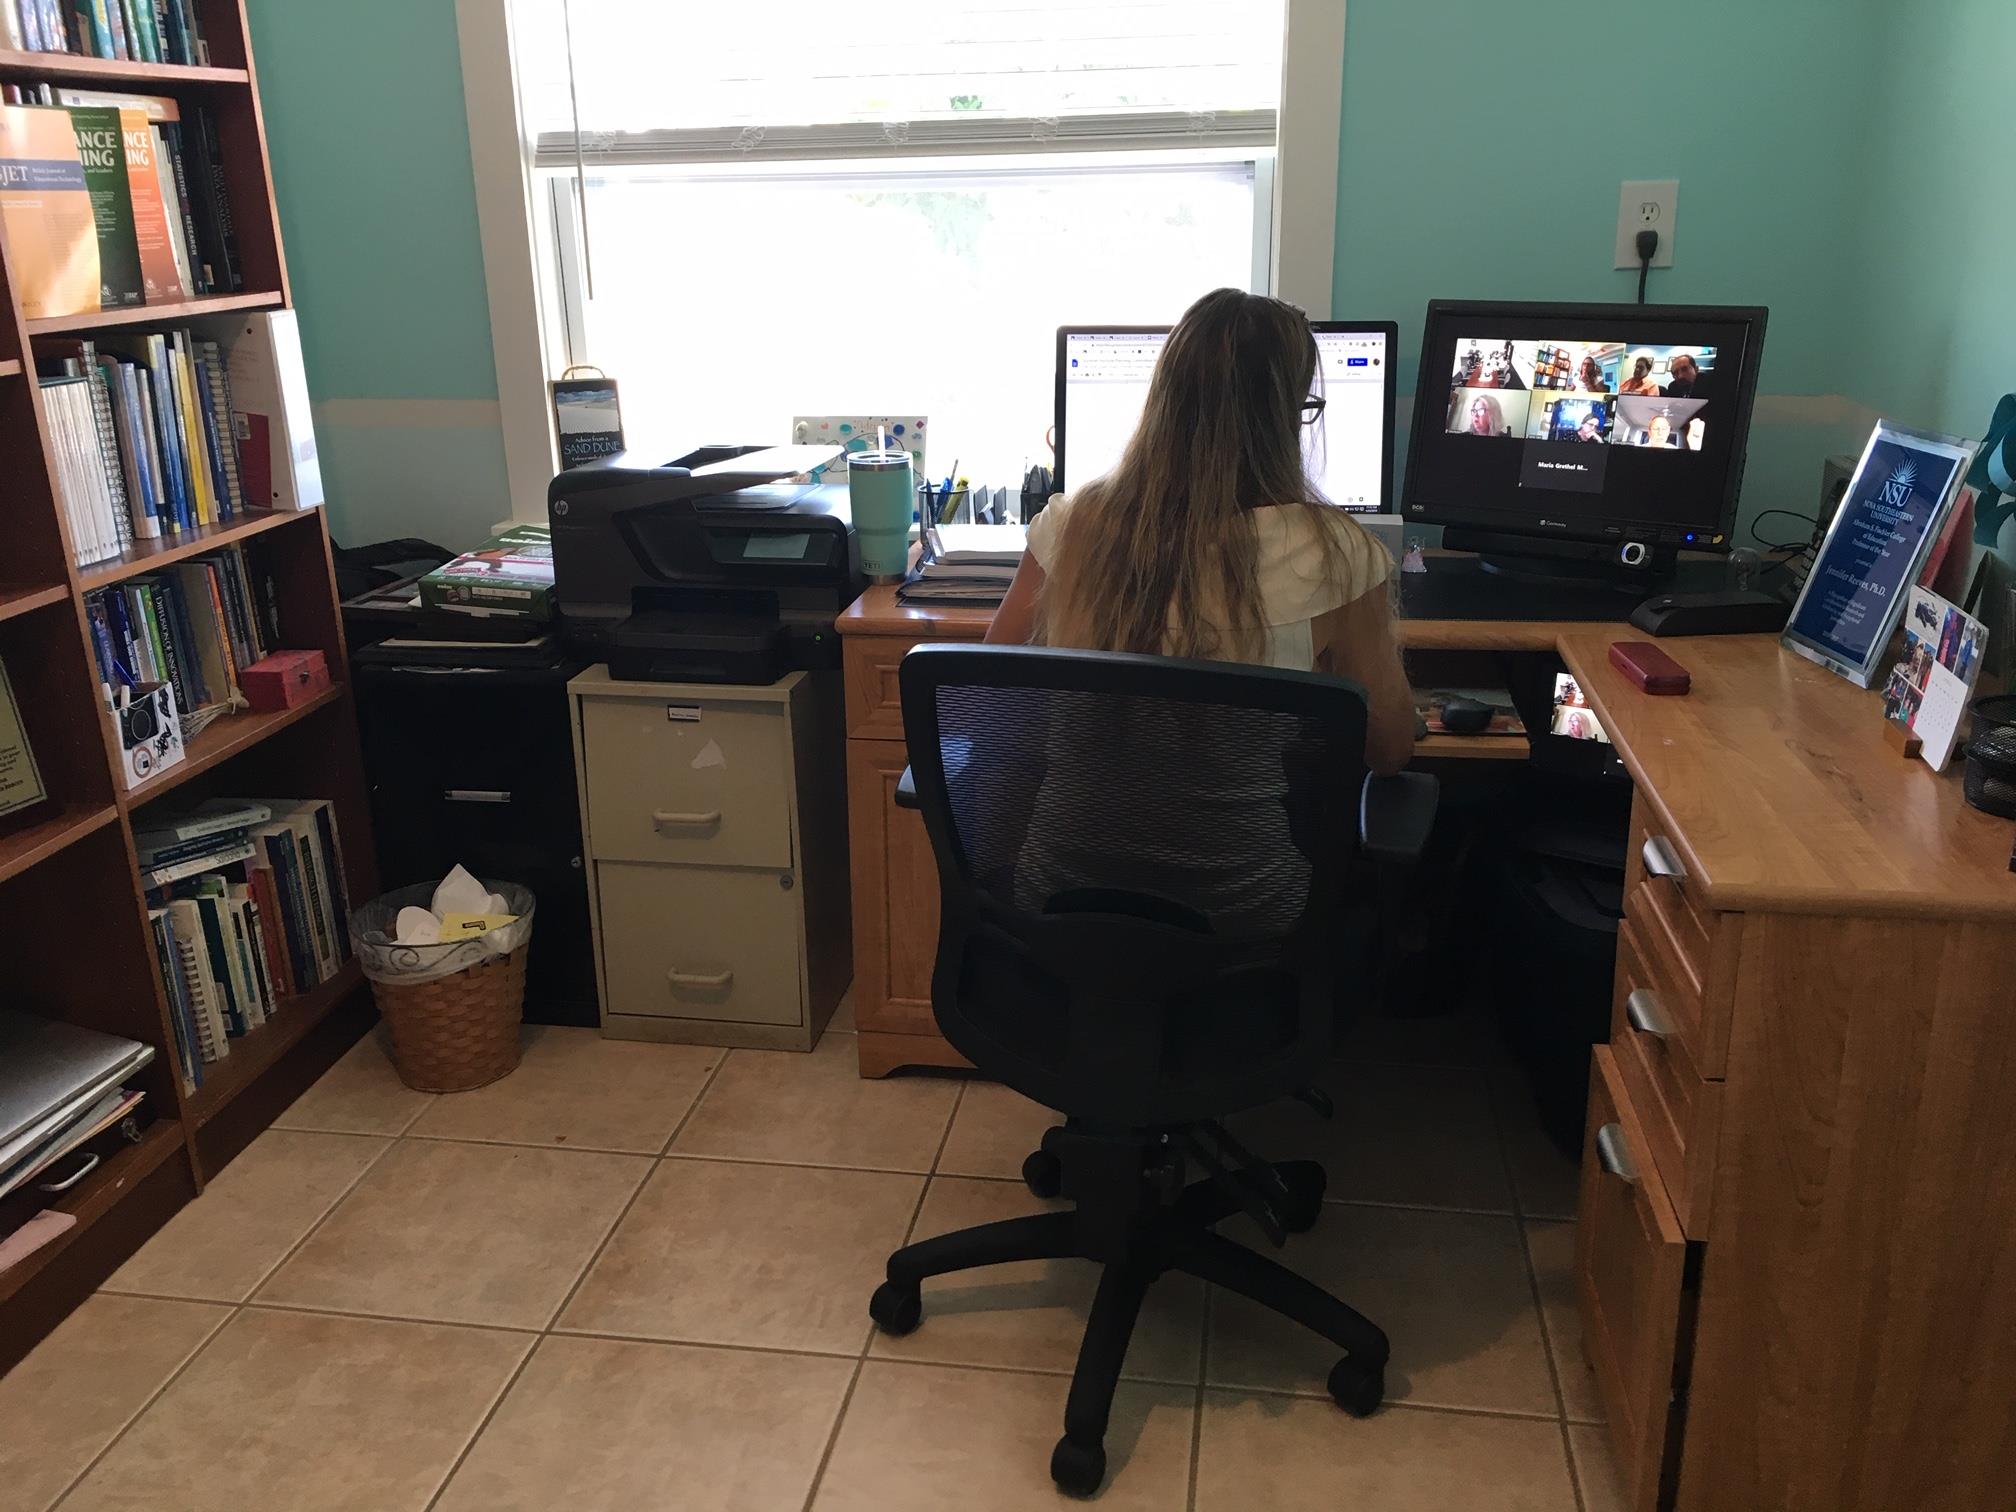 Jennifer Reeves' workspace includes two monitors and a nearby bookshelf